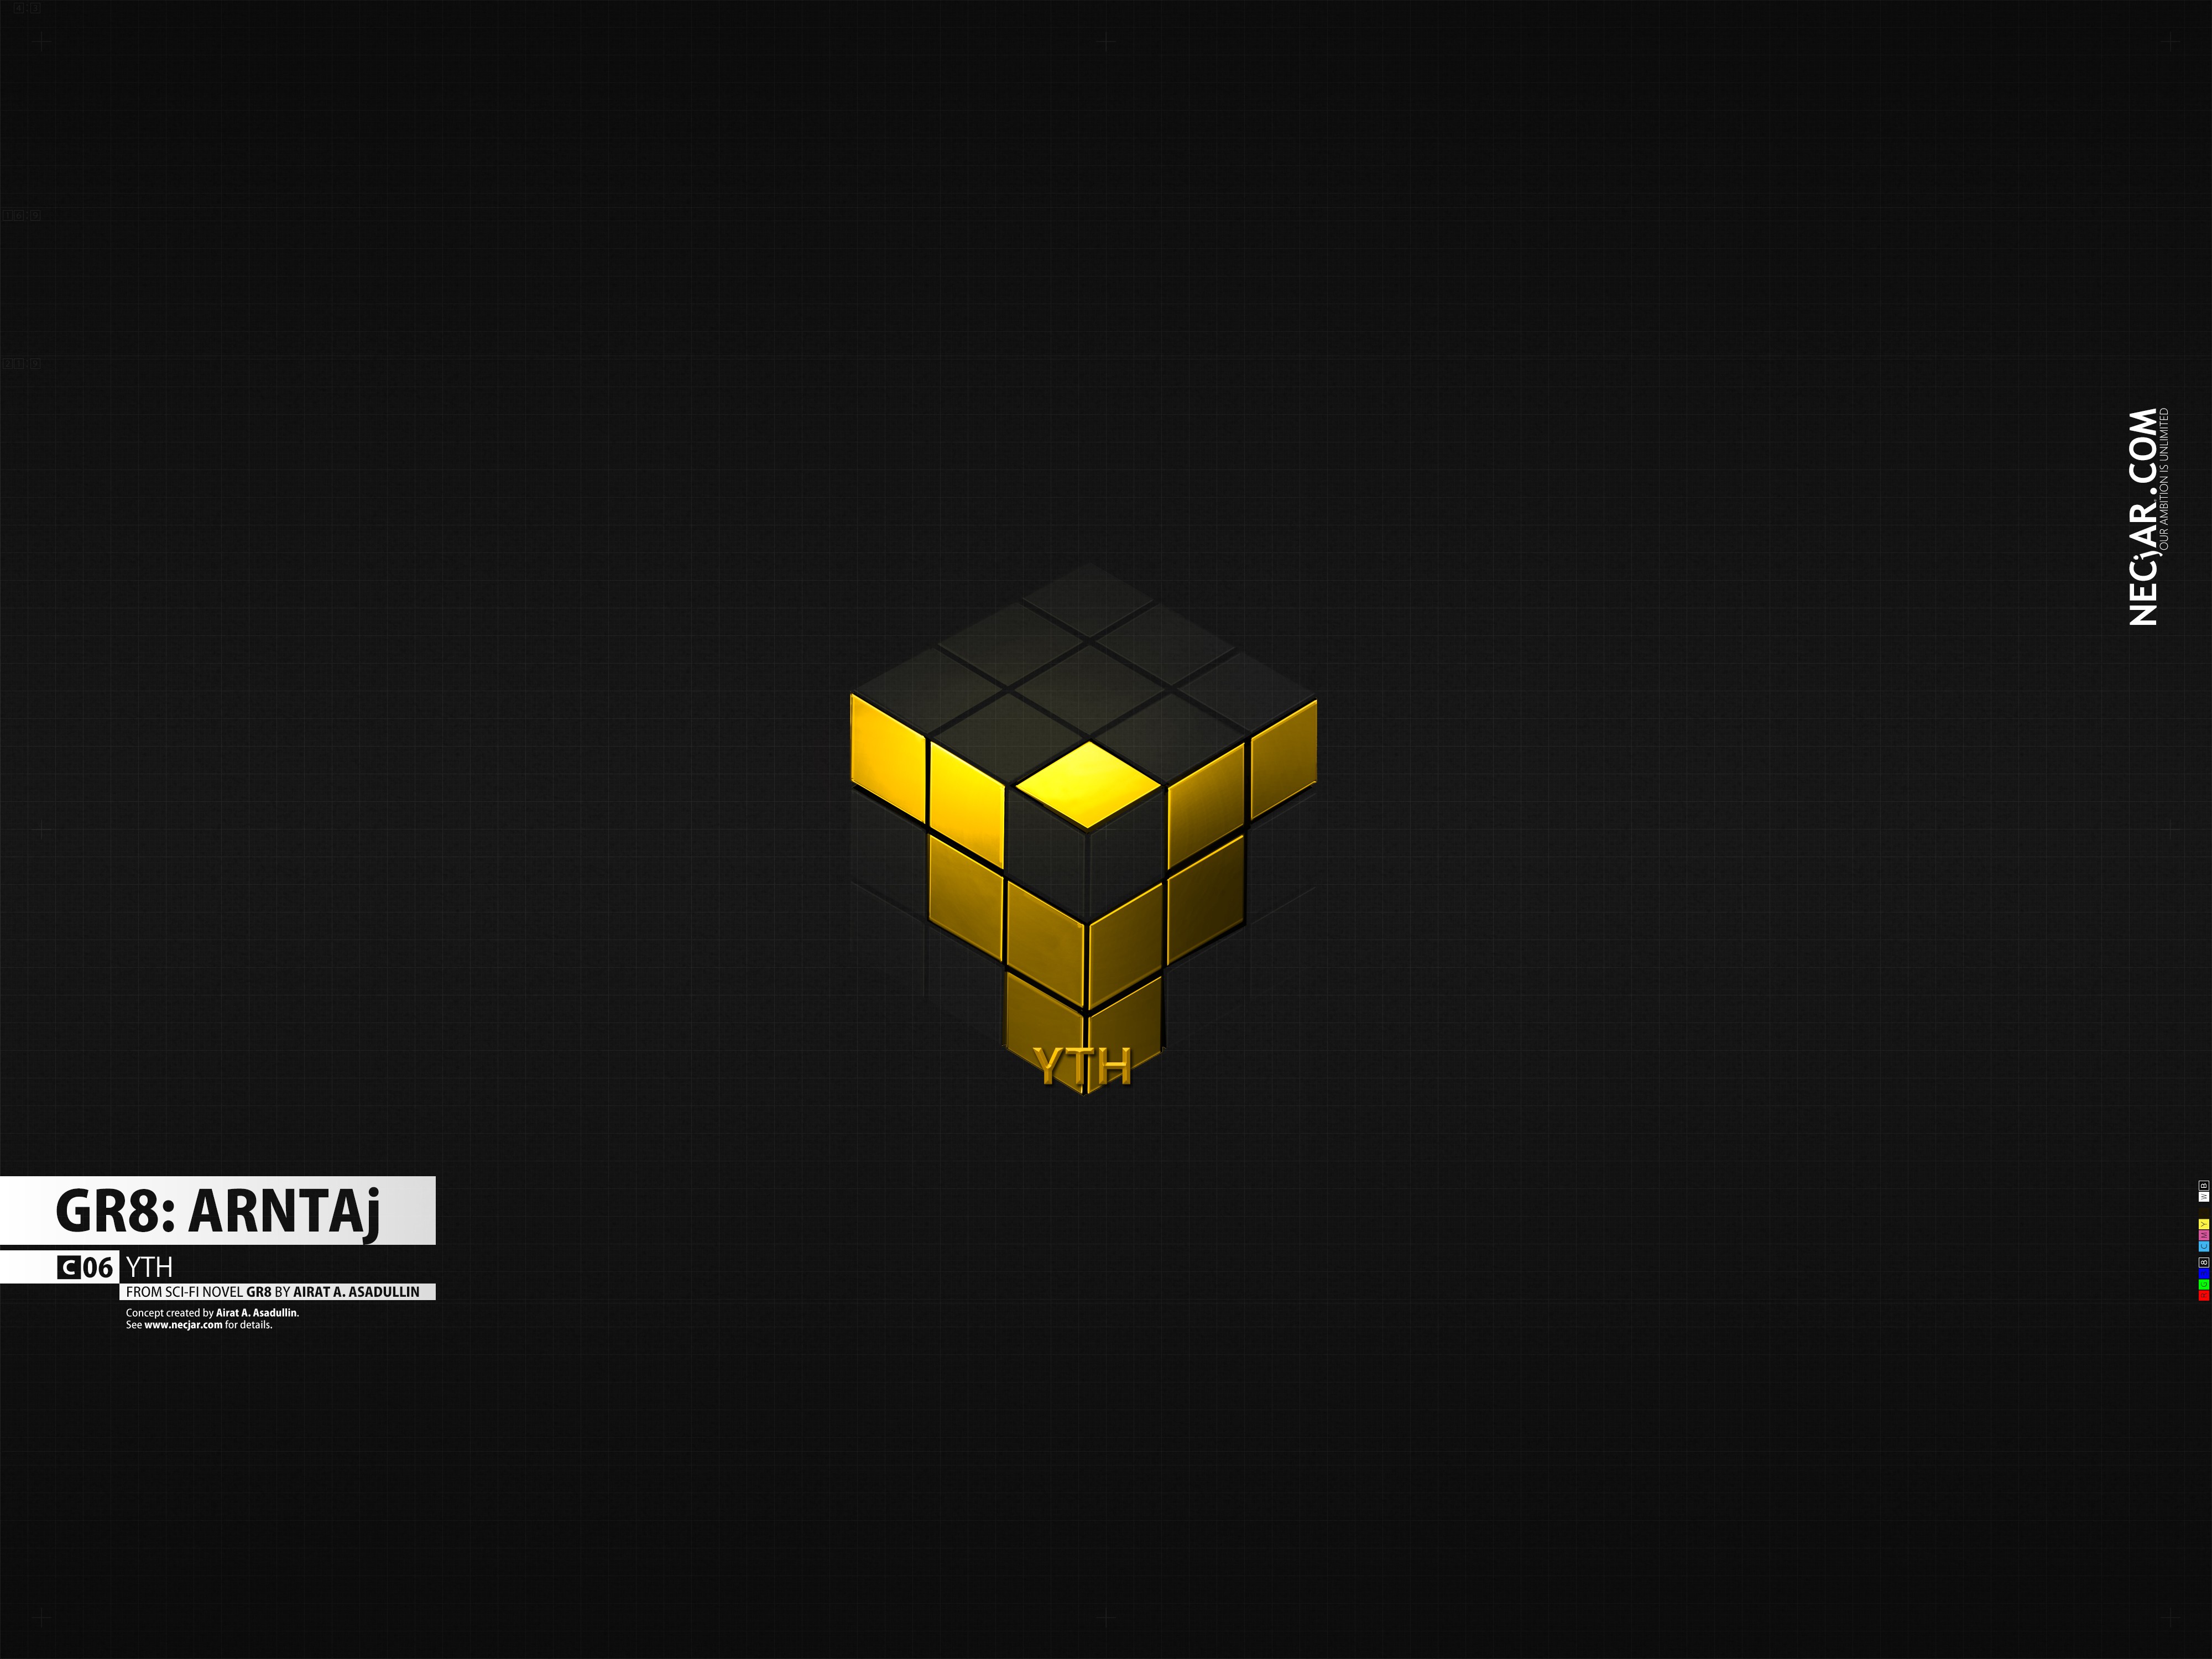 General 4000x3000 GR8 logo science fiction cube CGI 3D blocks abstract 3D Abstract digital art simple background black background